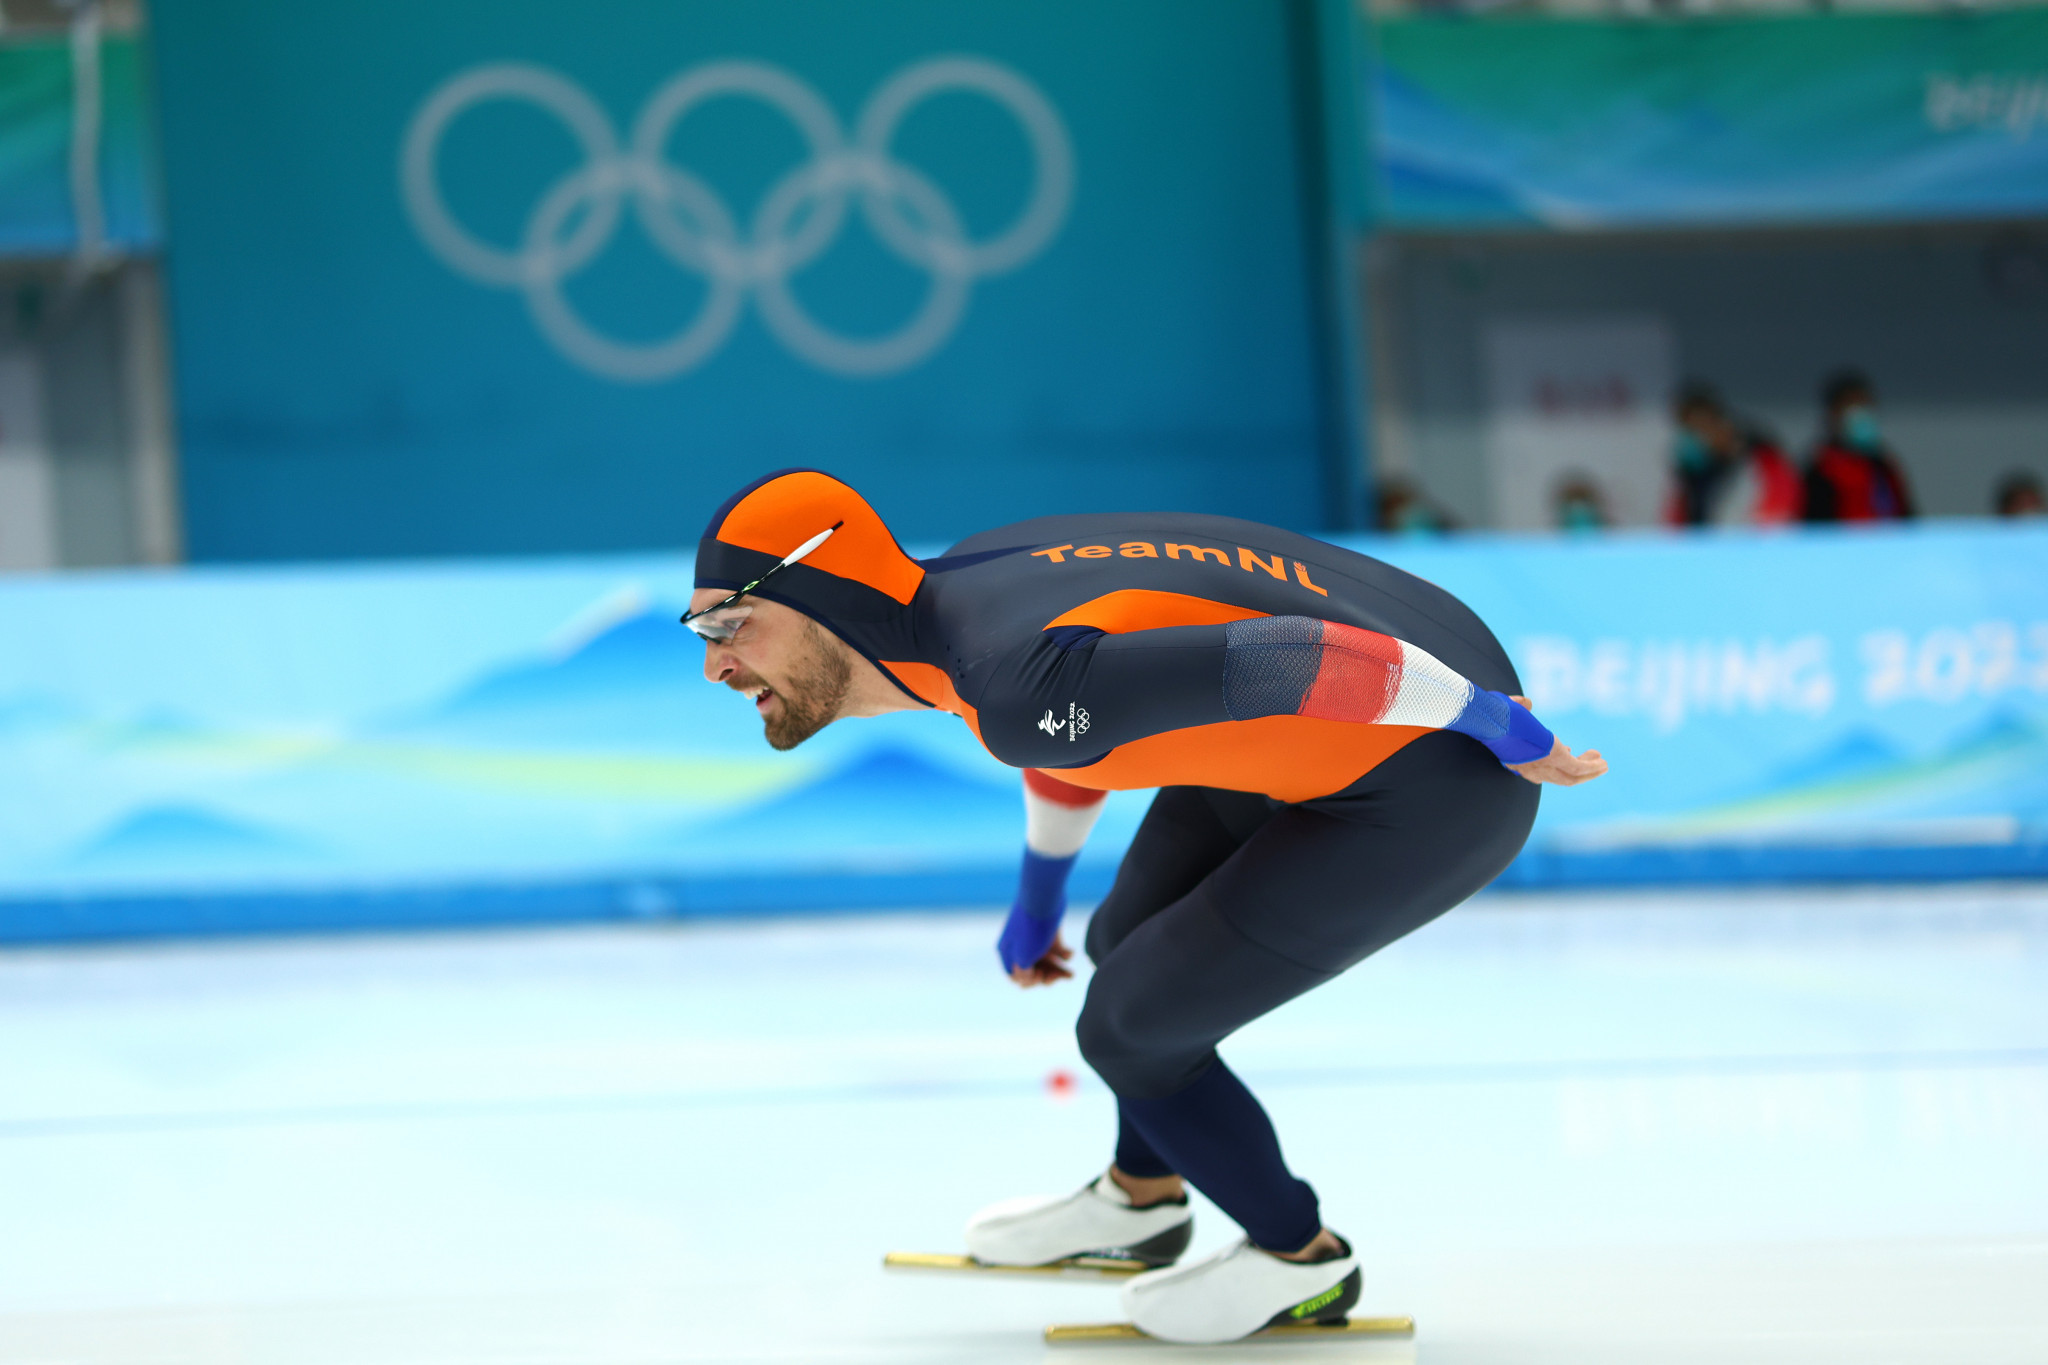 Flying Dutchman Nuis Olympic 1,500m speed skating champion again